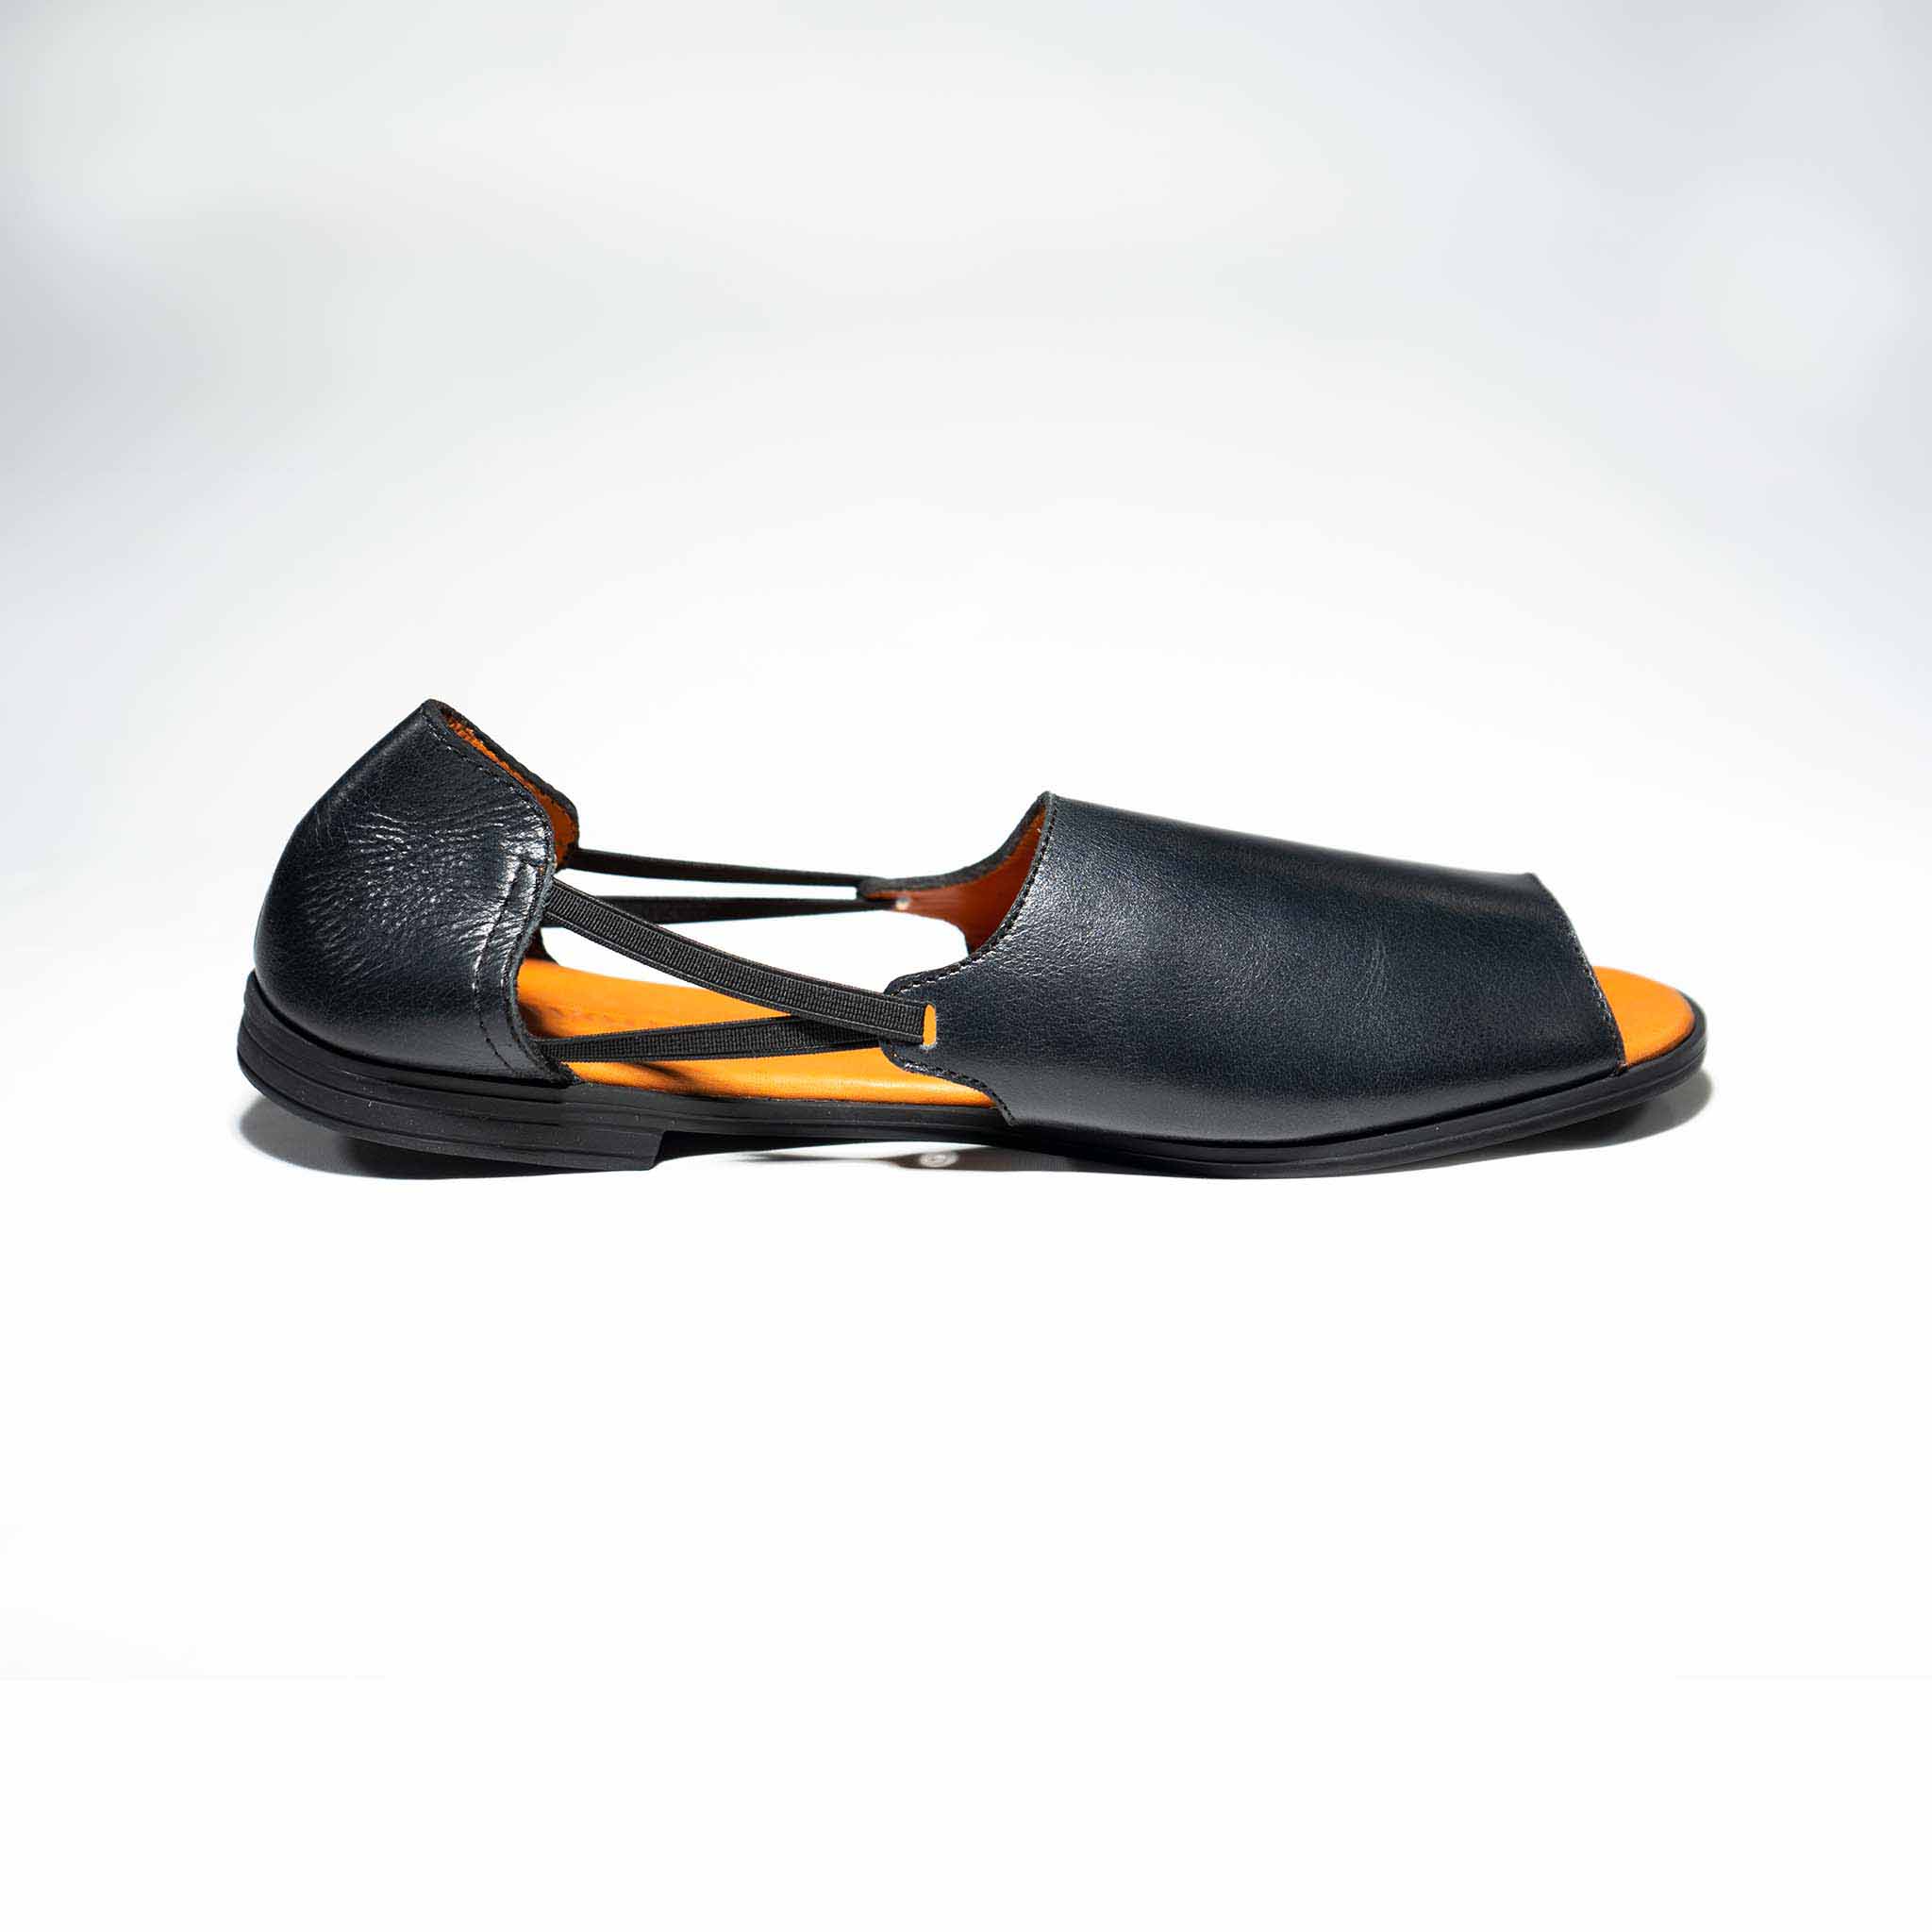 Womads black sandals for women side view